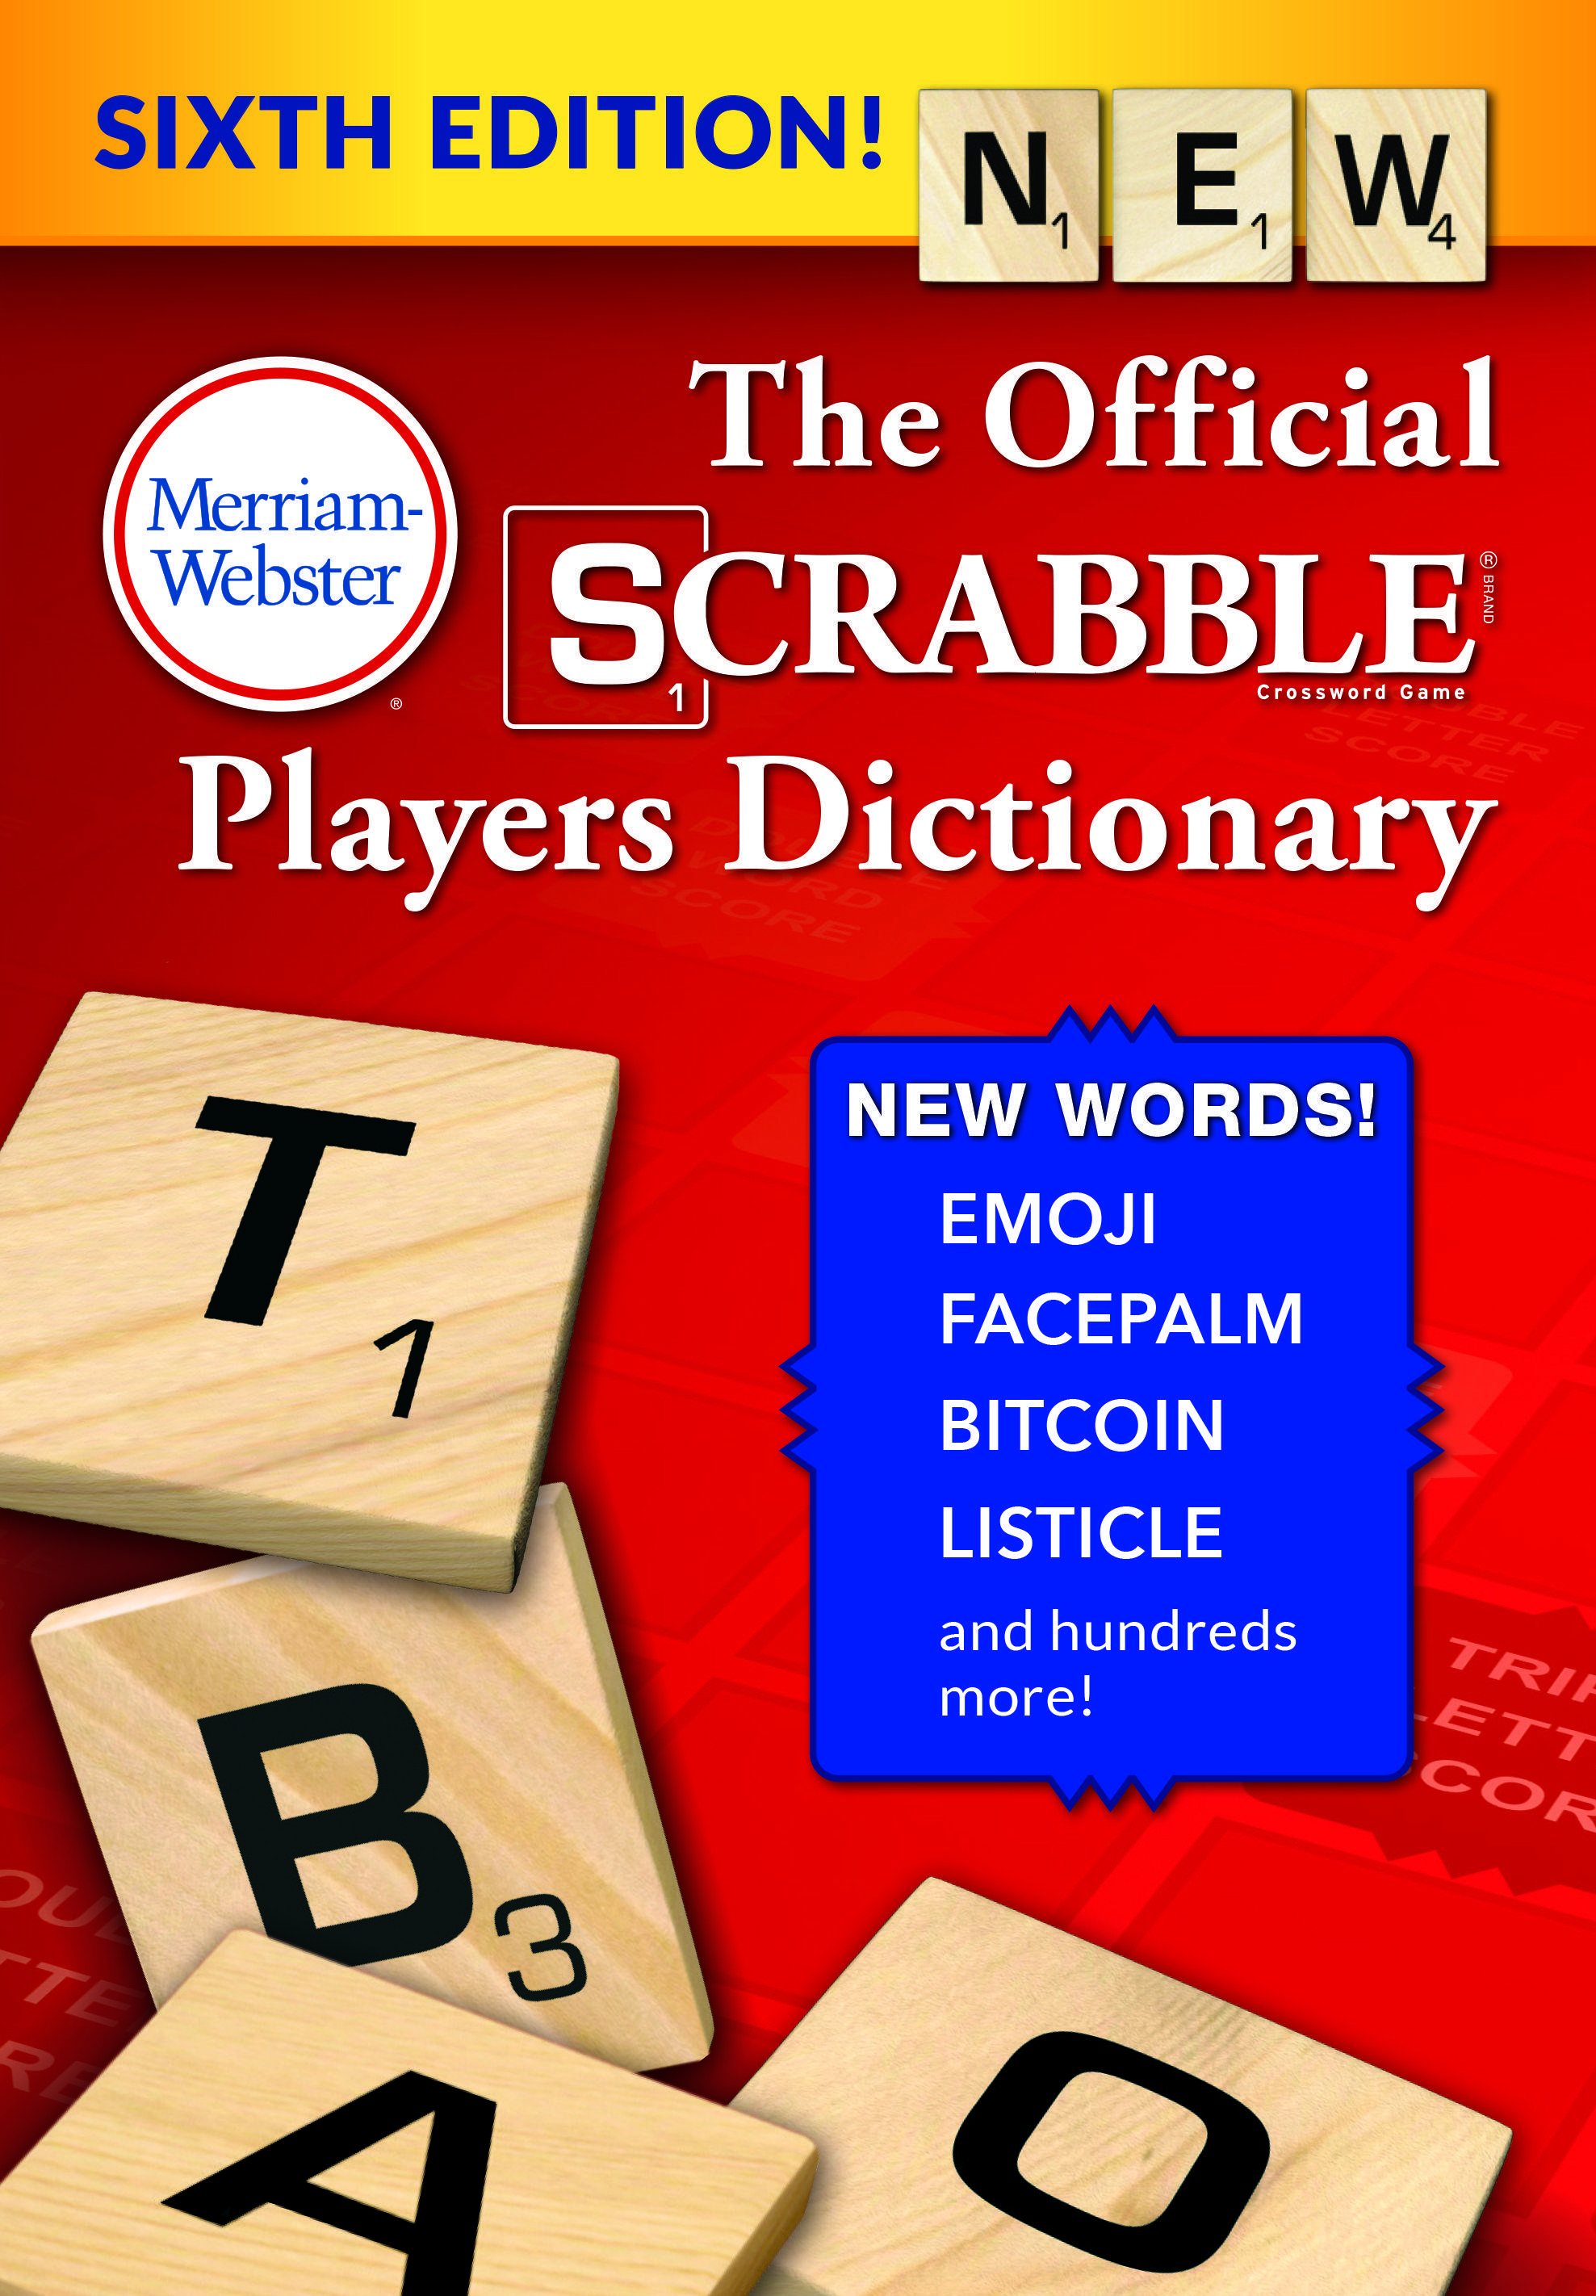 Merriam-Webster Logo - Merriam Webster Adds Over 300 New Words To The Official SCRABBLE